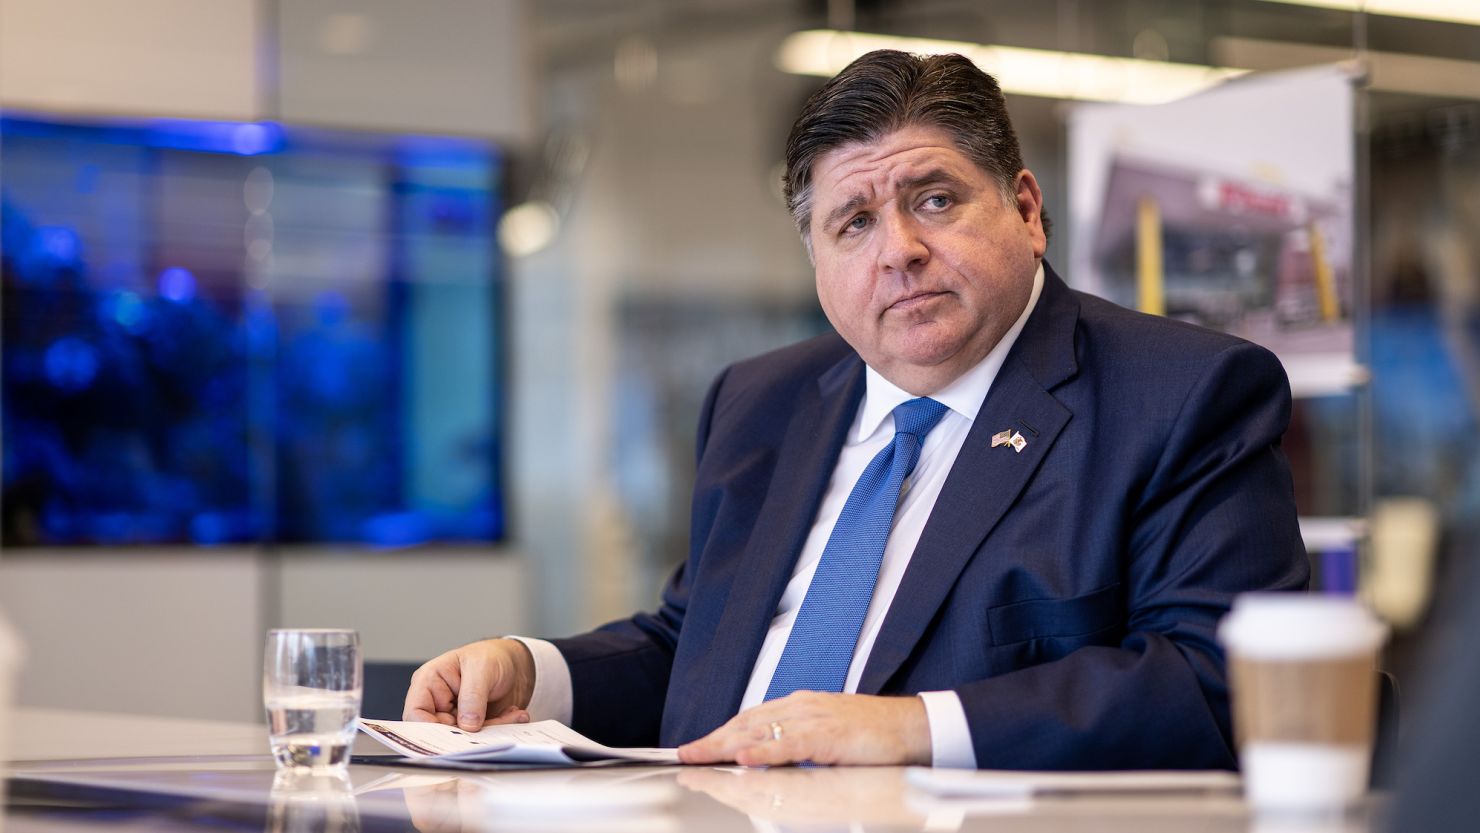 J.B. Pritzker, governor of Illinois, said book bans "are about censorship."